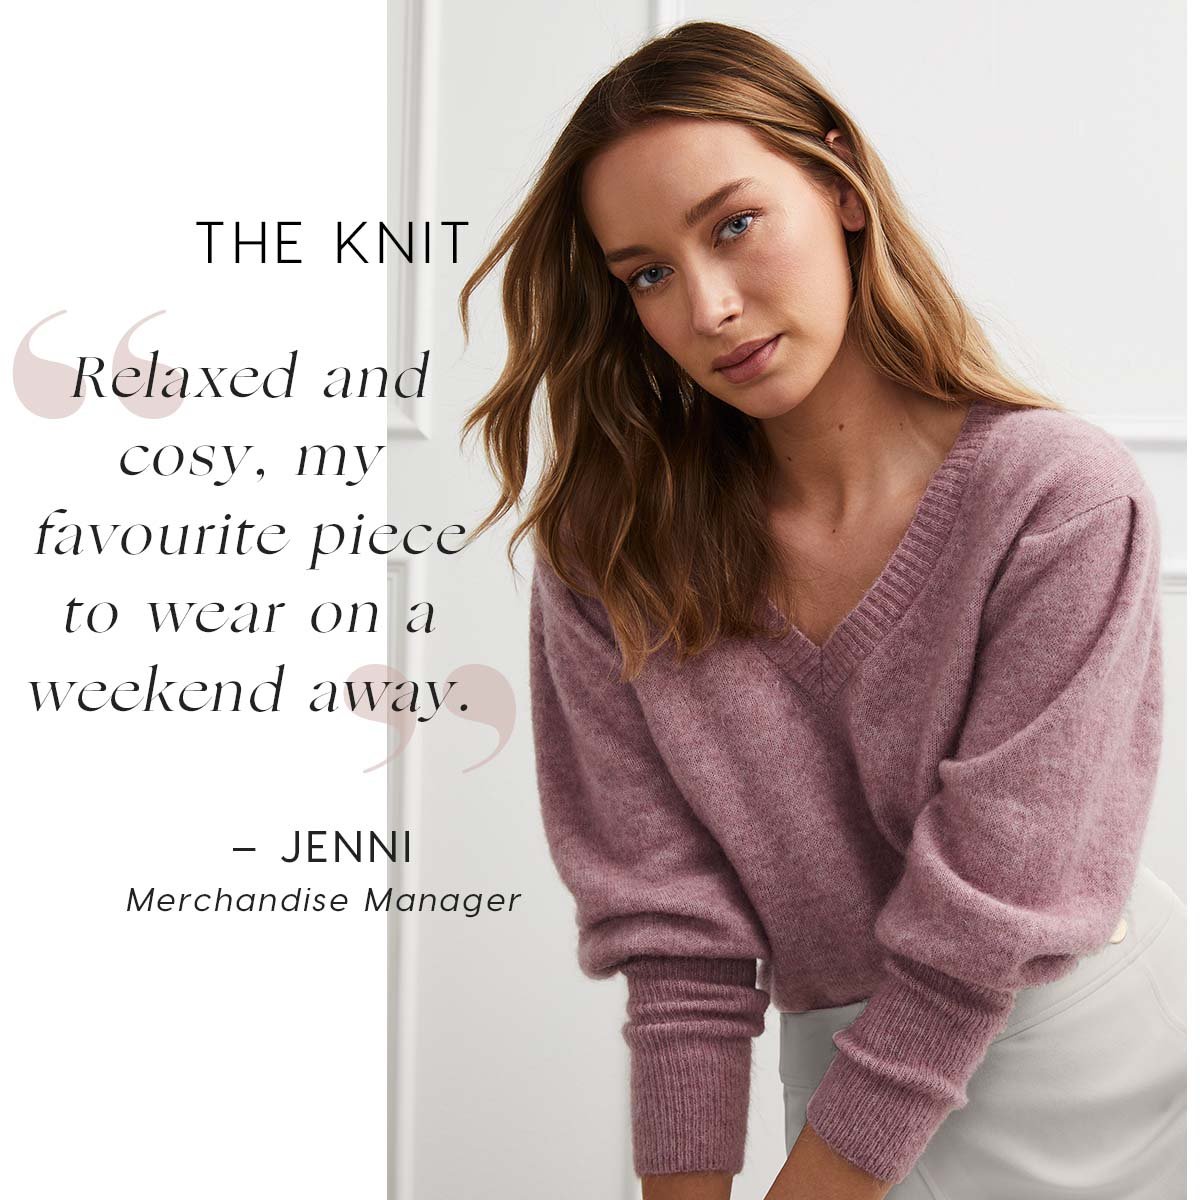 The Knit. Relaxed and cosy, my favourite piece to wear on a weekend away.